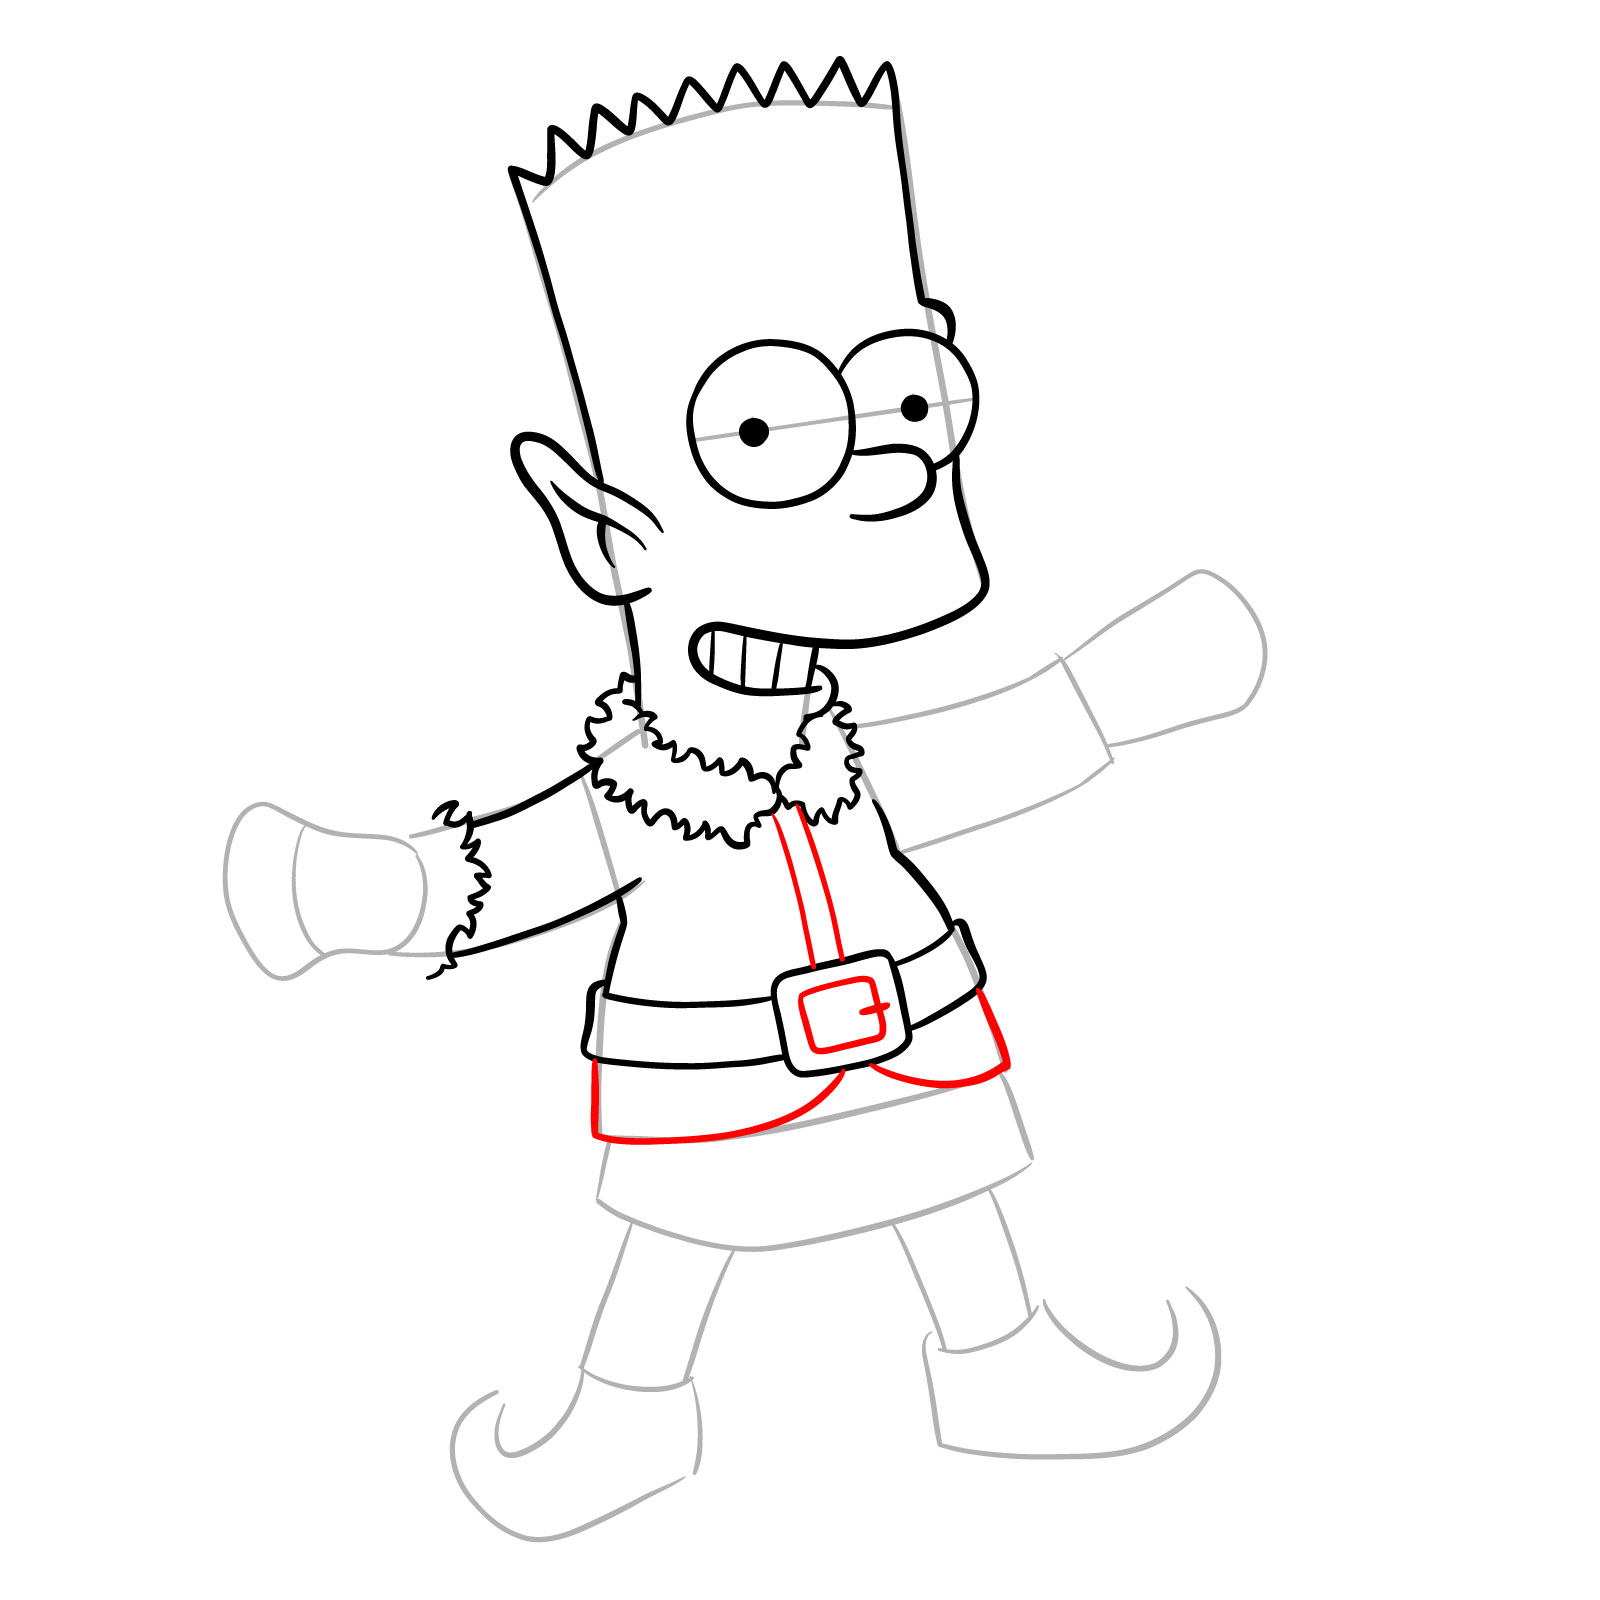 How to draw Bart Simpson as a Christmas Elf - step 18